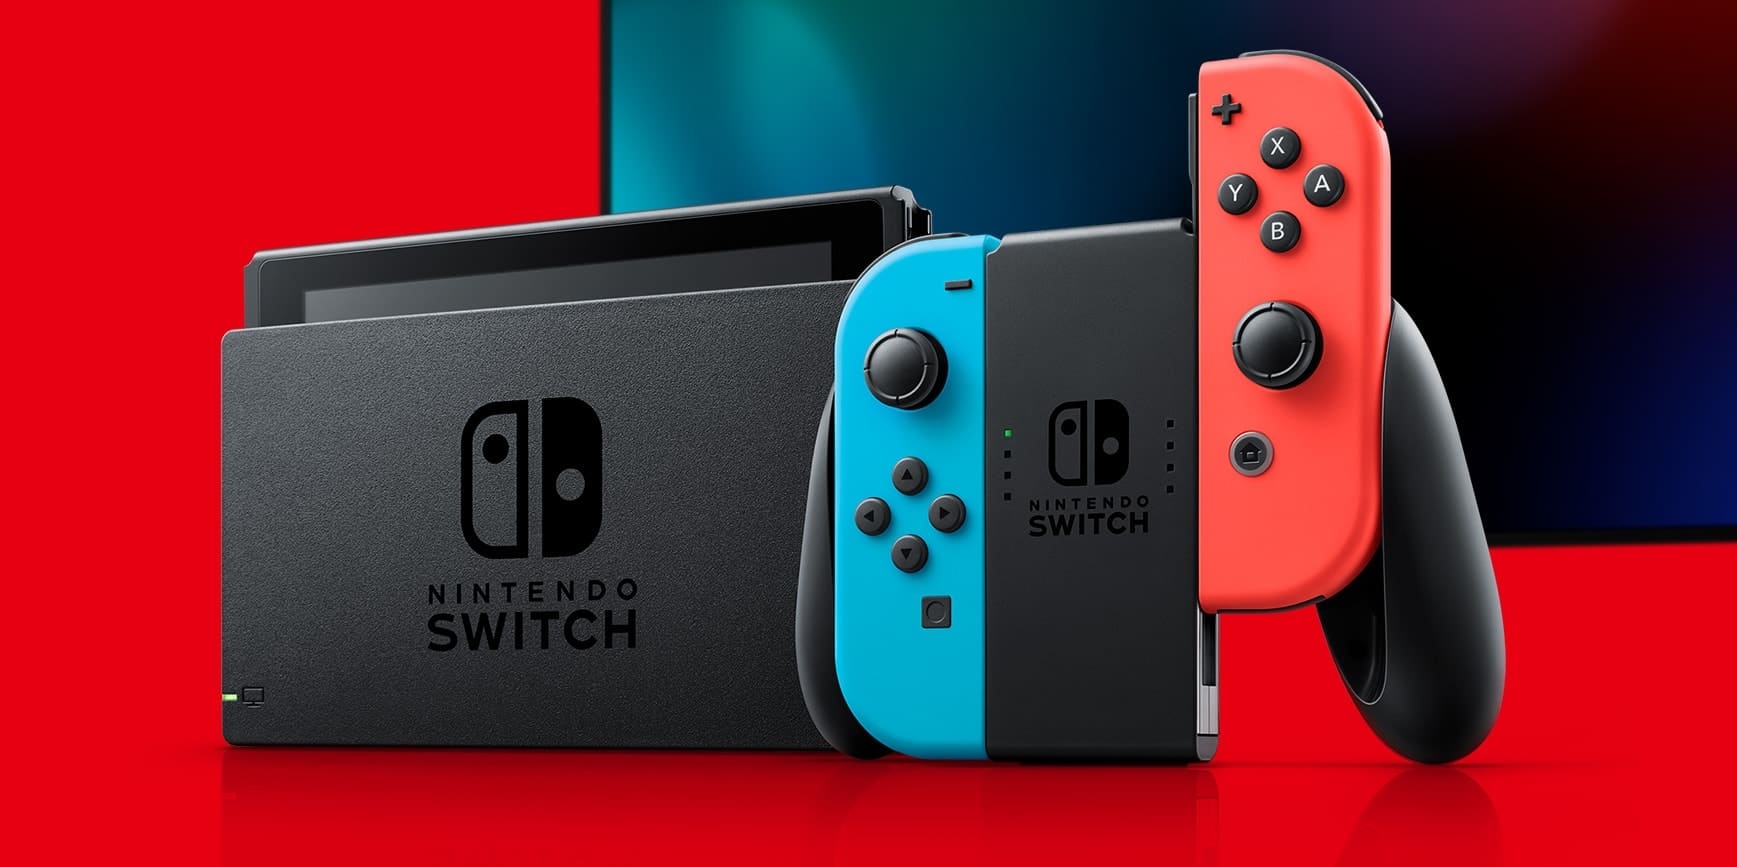 French Consumers’ Association Names Nintendo Switch Most Fragile Product Of The Year For Joy-Con Issues